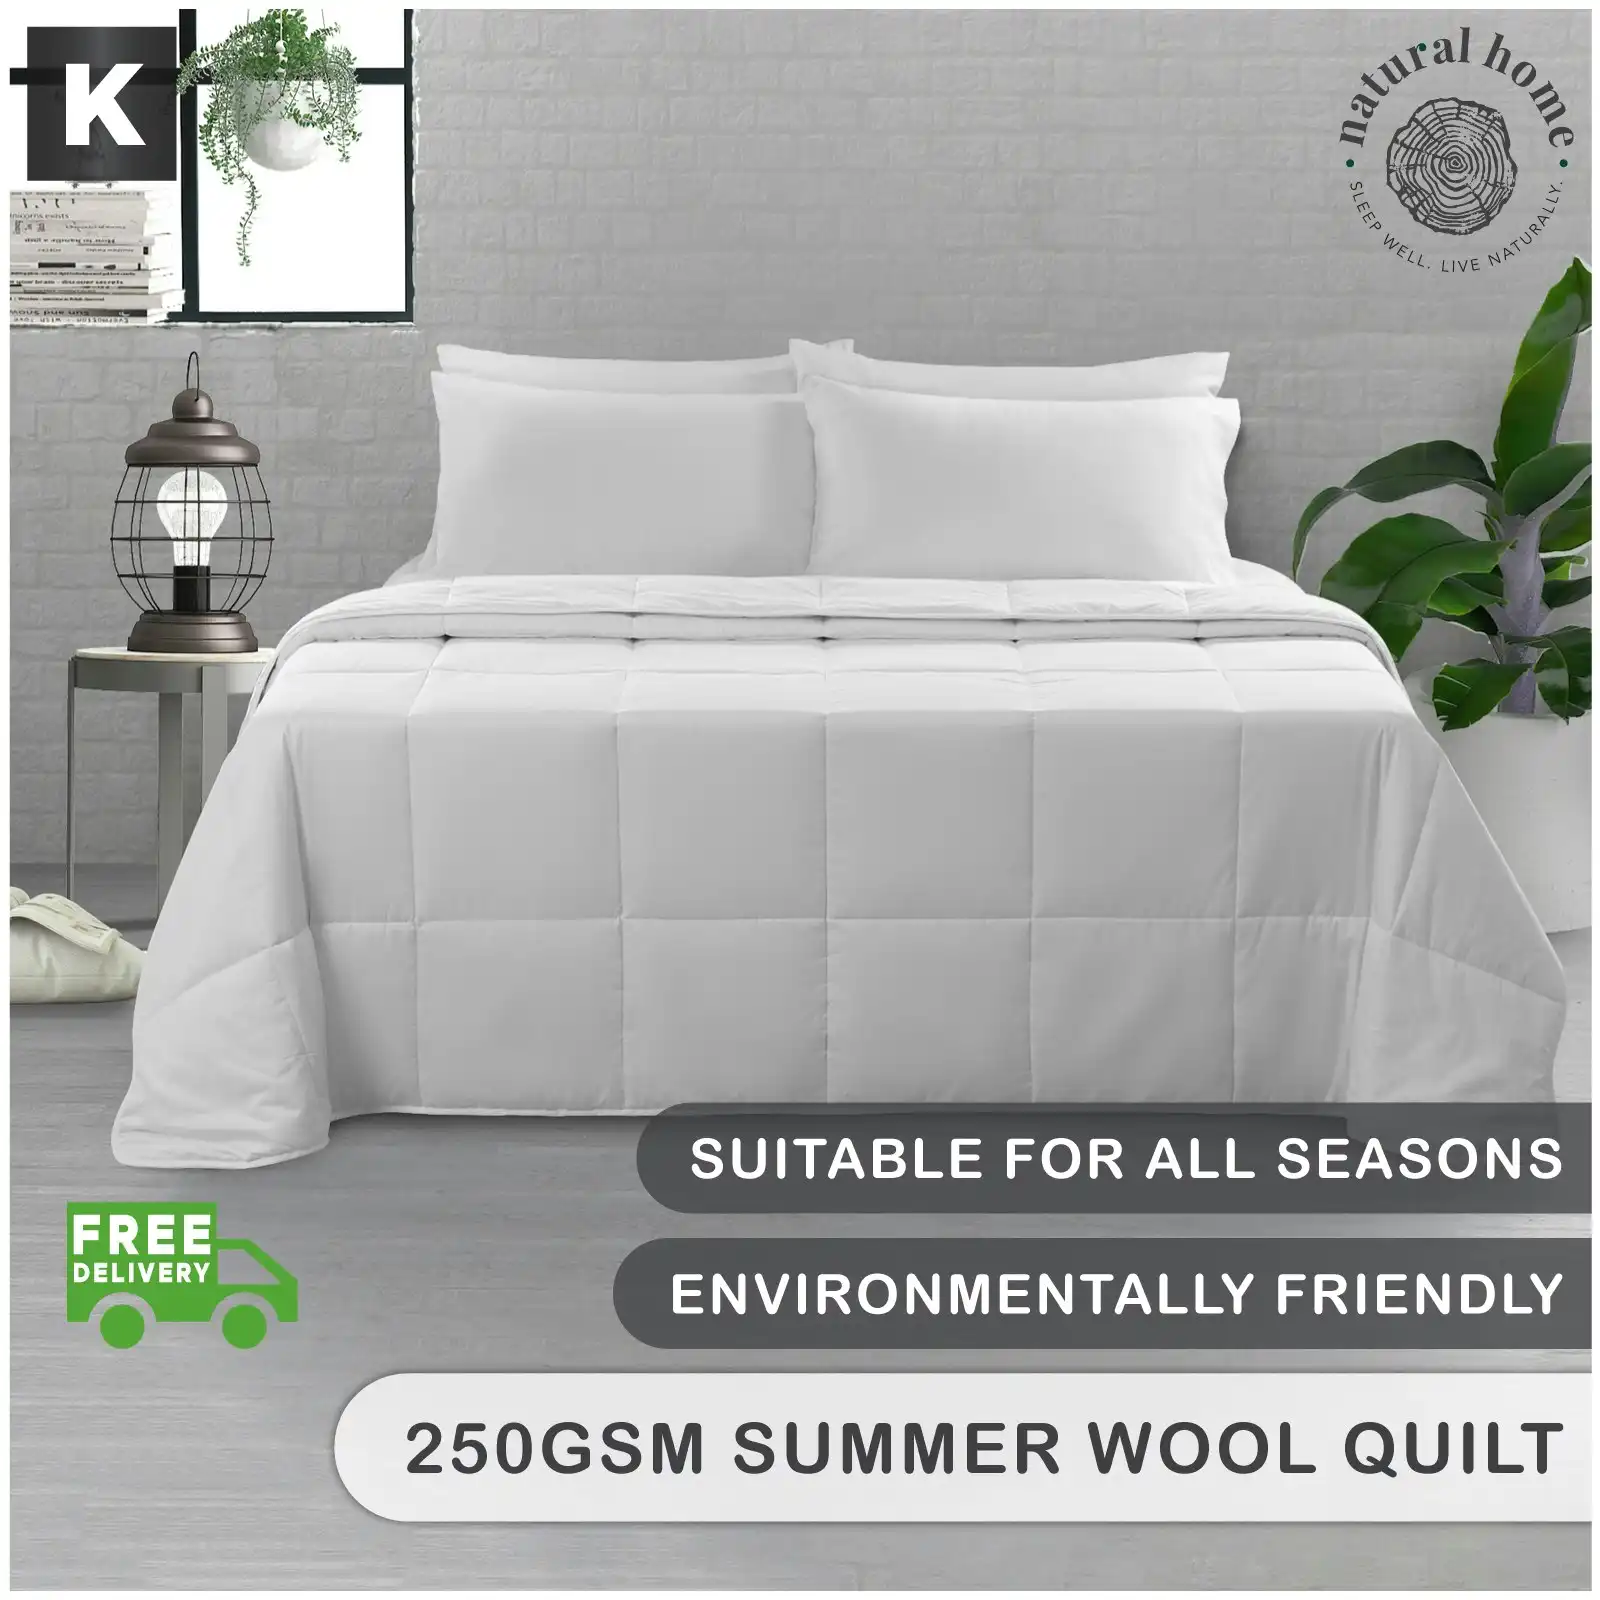 Natural Home Summer Wool Quilt 250gsm White King Bed